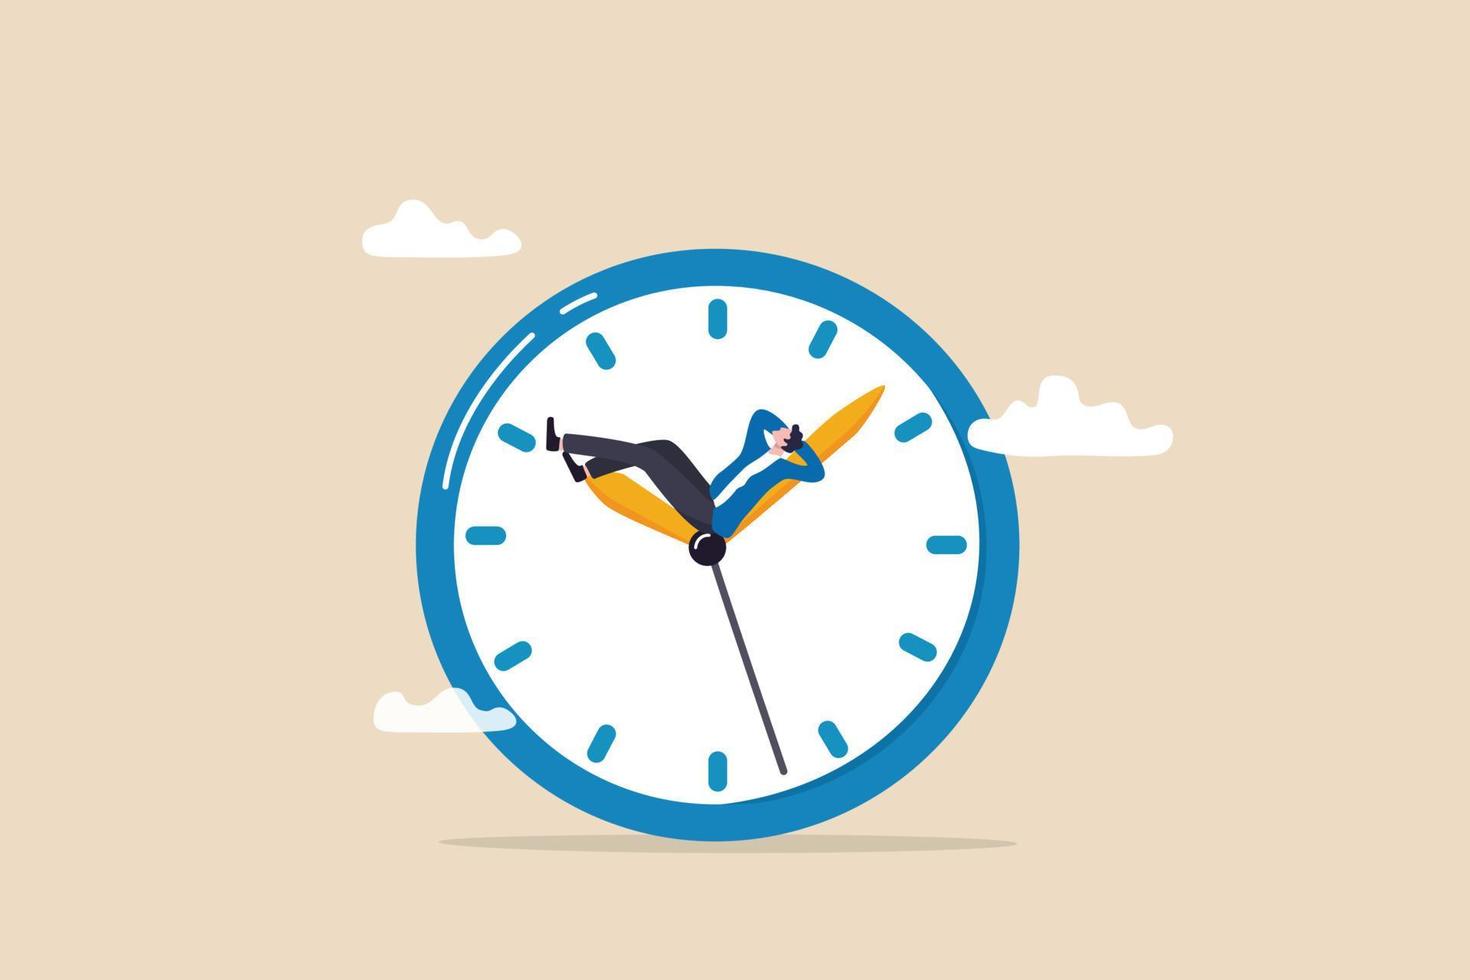 Wasted time, procrastination or slow life, lazy to work, low productivity or efficiency, self discipline problem, tired or no motivation concept, lazy businessman sleeping on the time running clock. vector